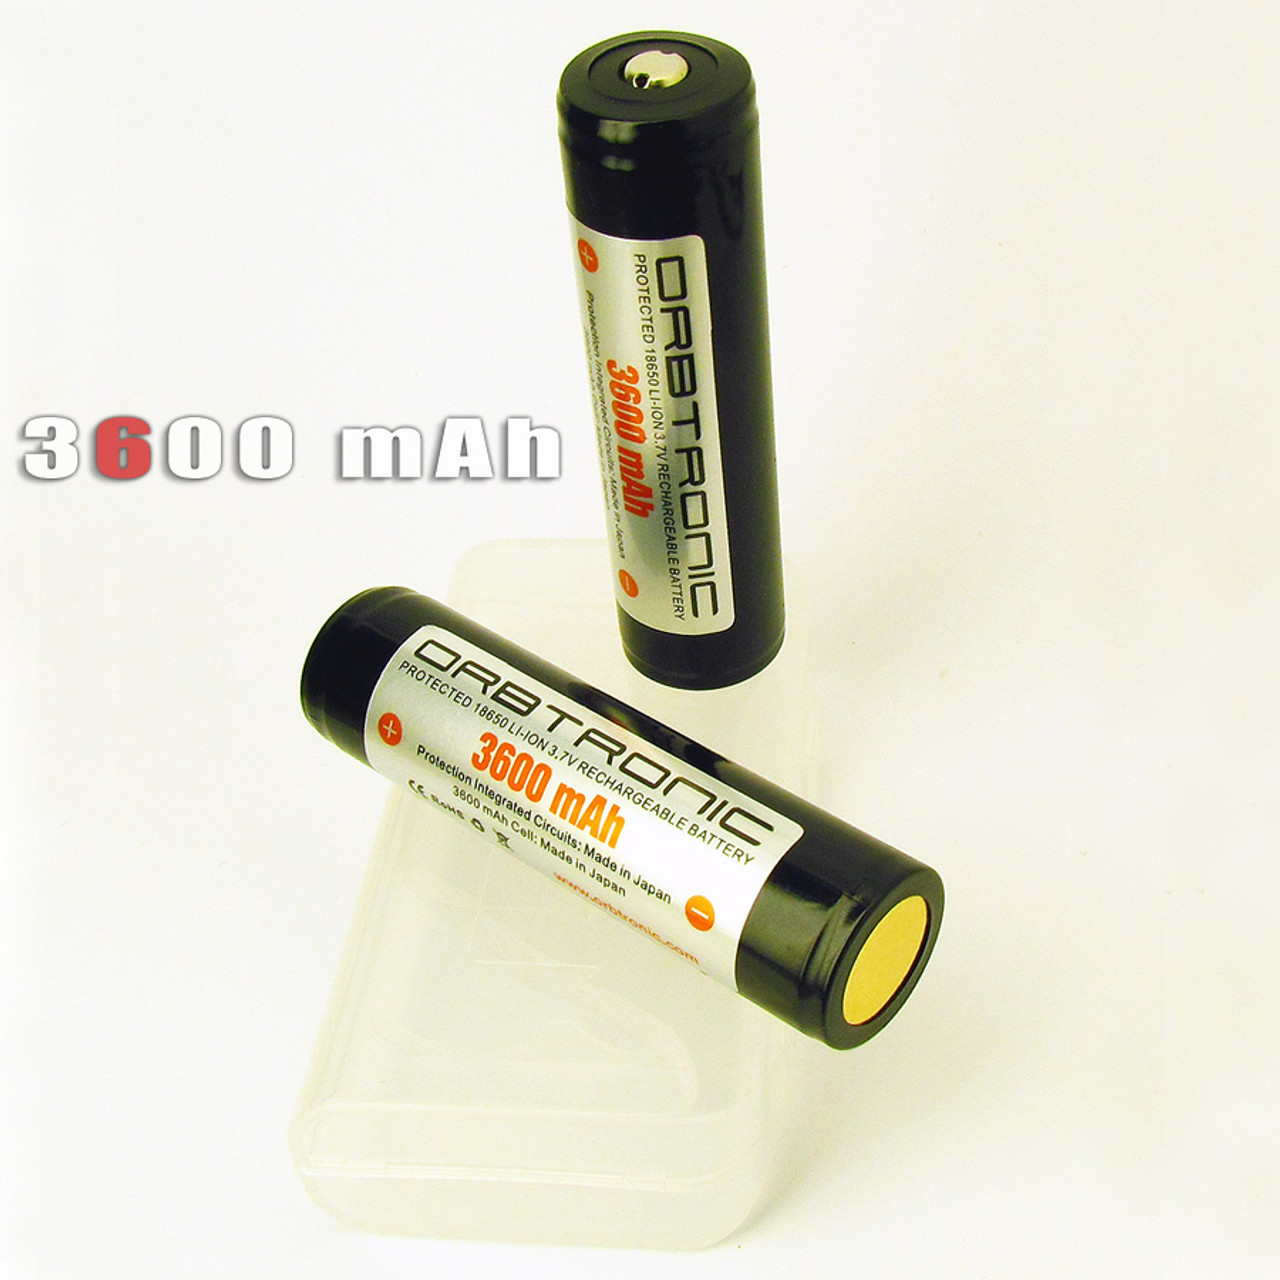 Panasonic High-performance batteries - All the products on